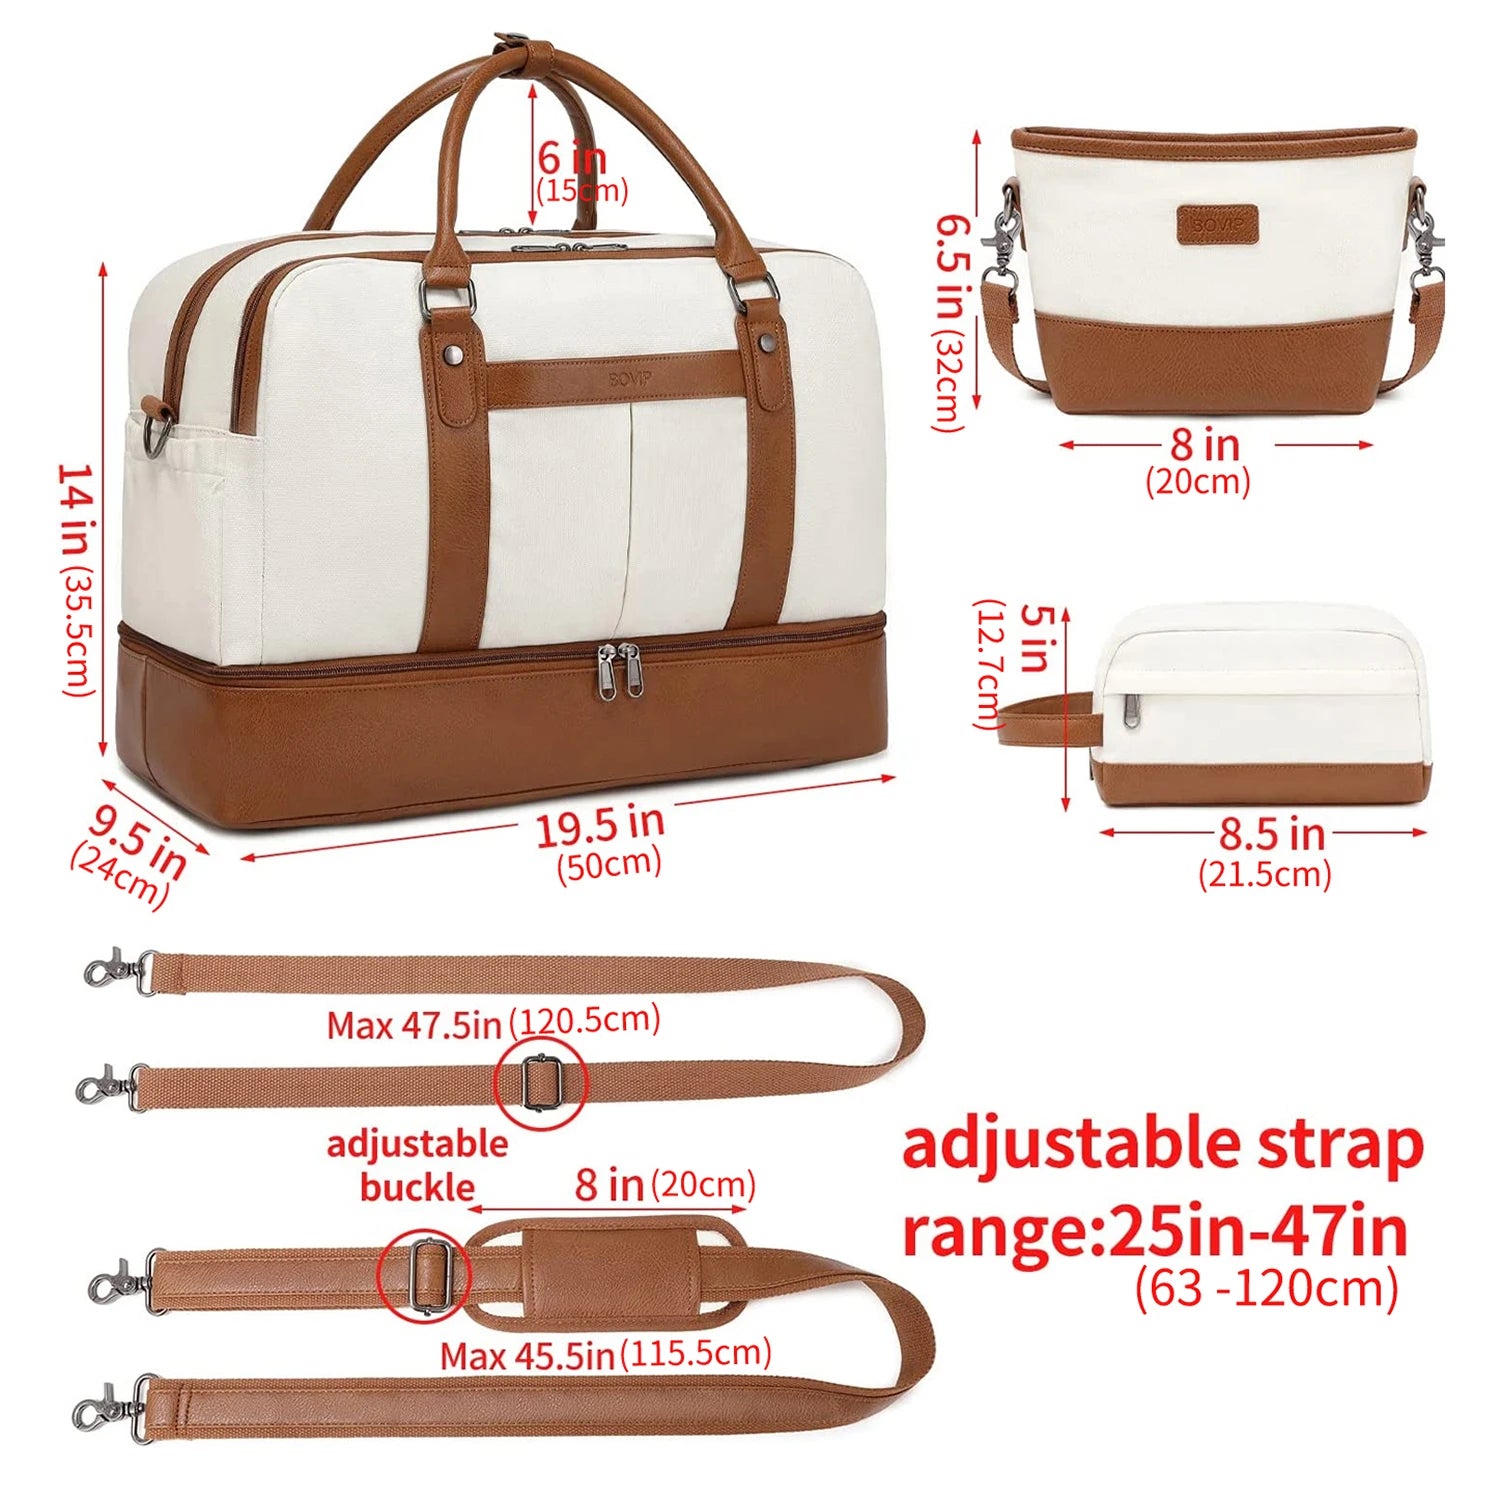 Jetsetter Charm: Elegant Canvas Weekender with Shoe Compartment